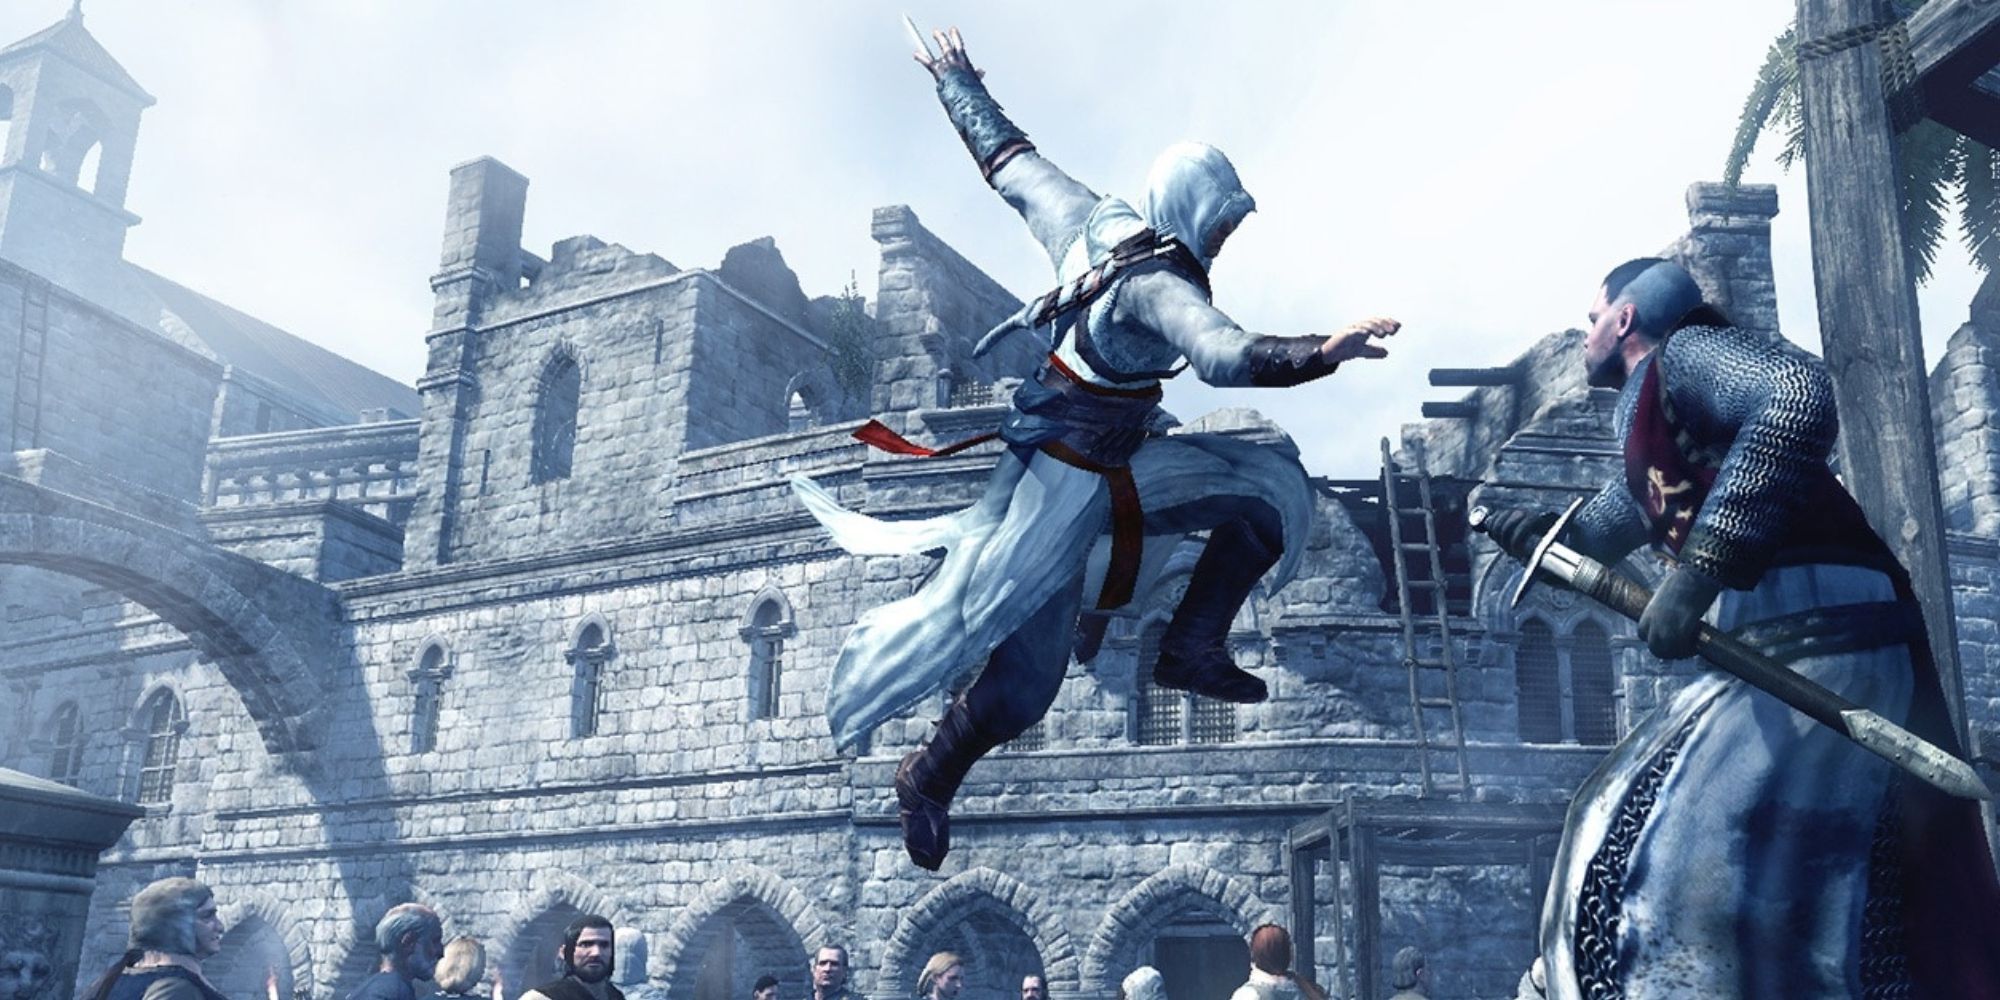 Altair leaping at a knight with his hidden blade drawn